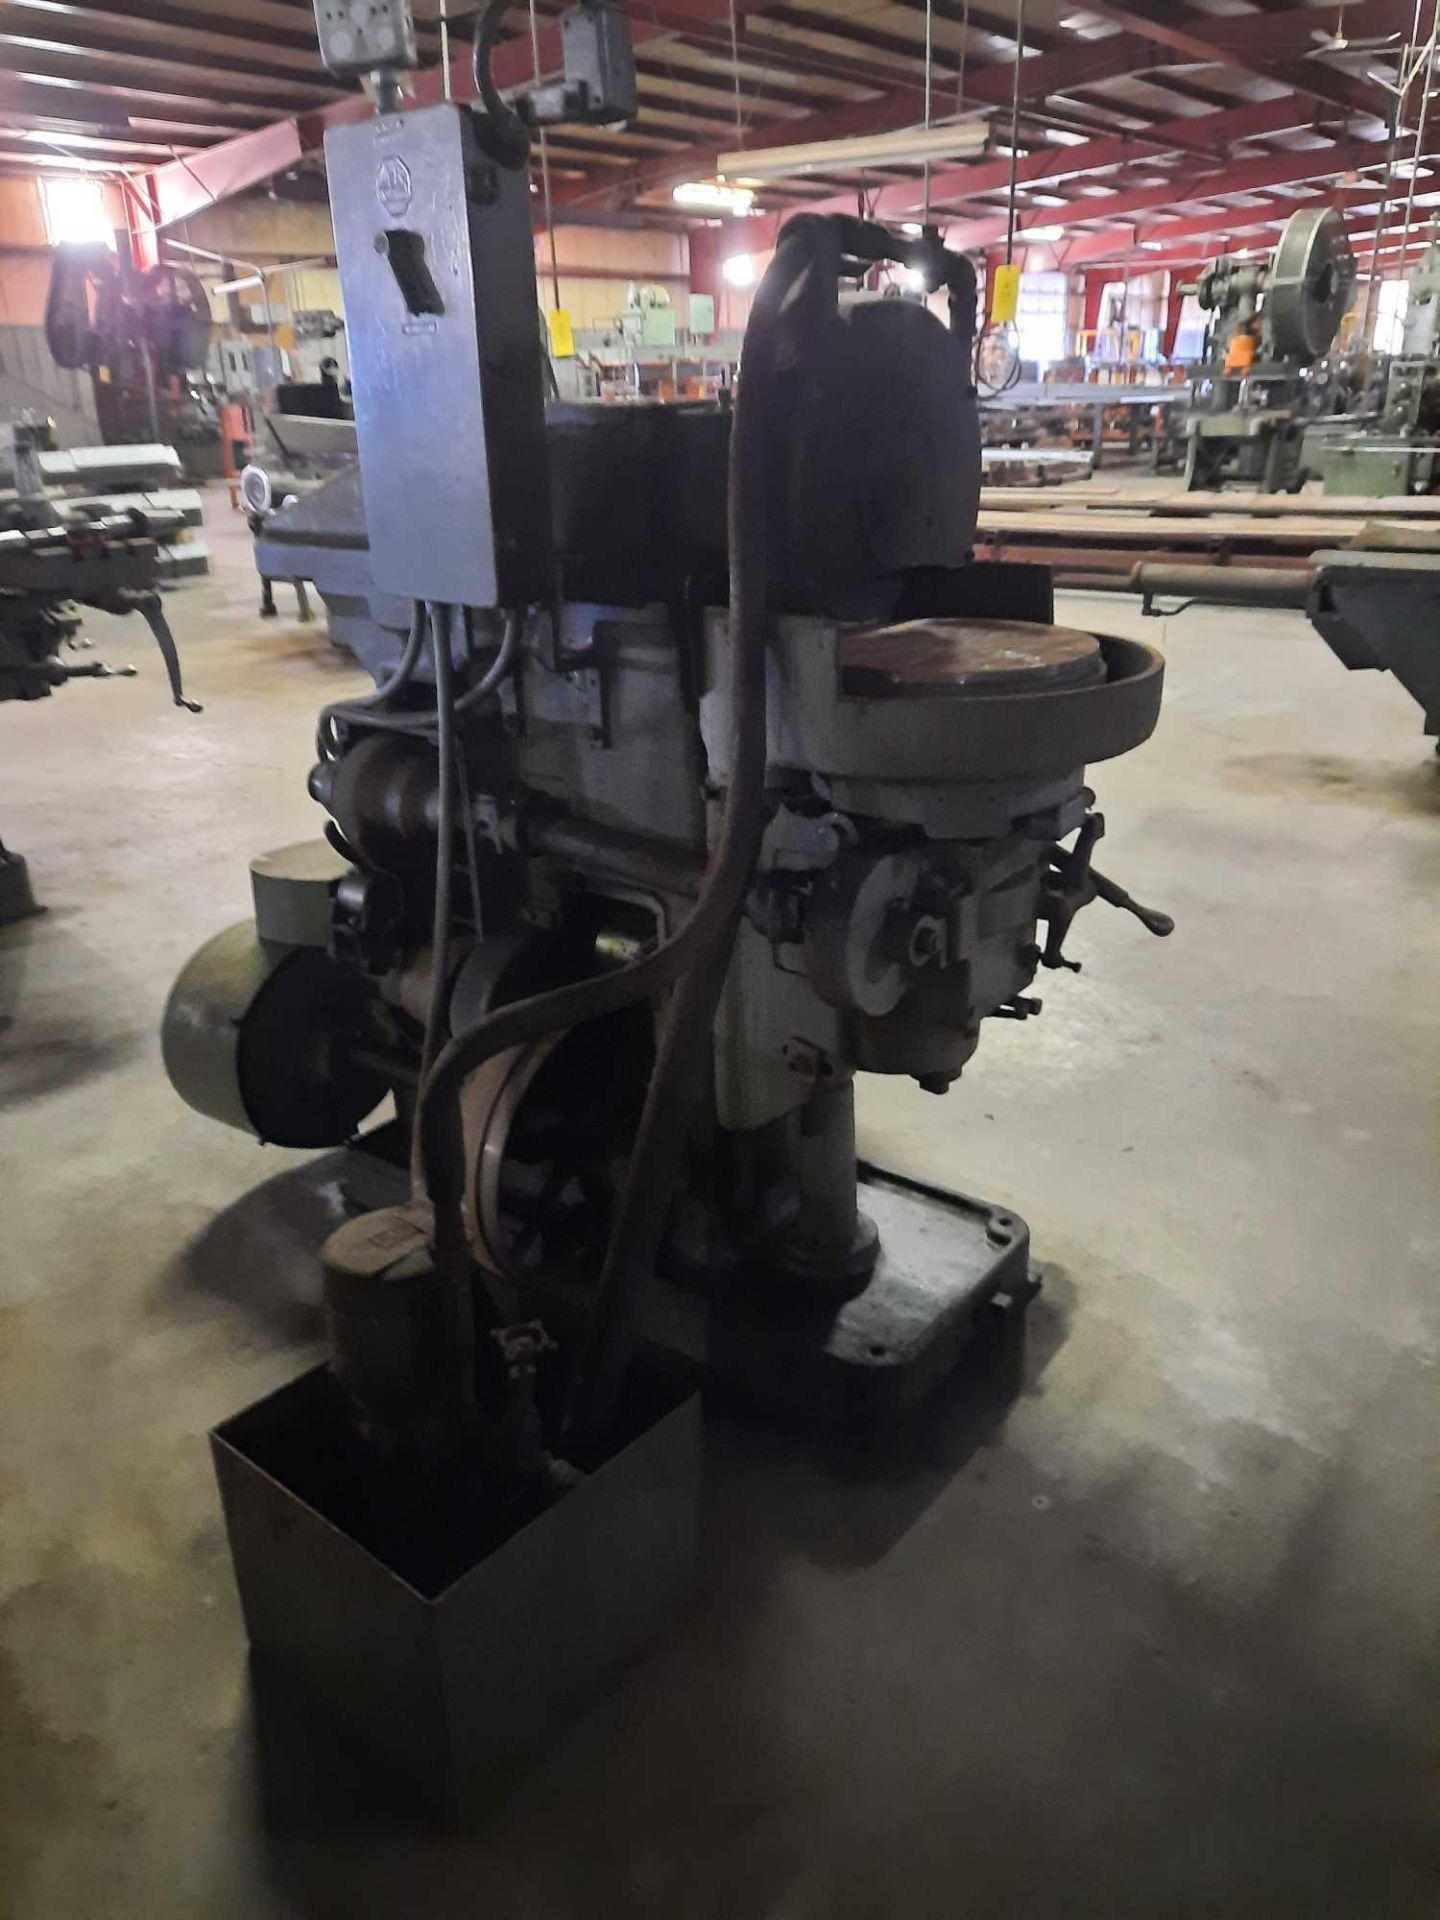 Arter rotary grinder, model A-1-12, serial 603, 14 inch chuck, overall dimensions 66 x 43 x 70 - Image 5 of 8